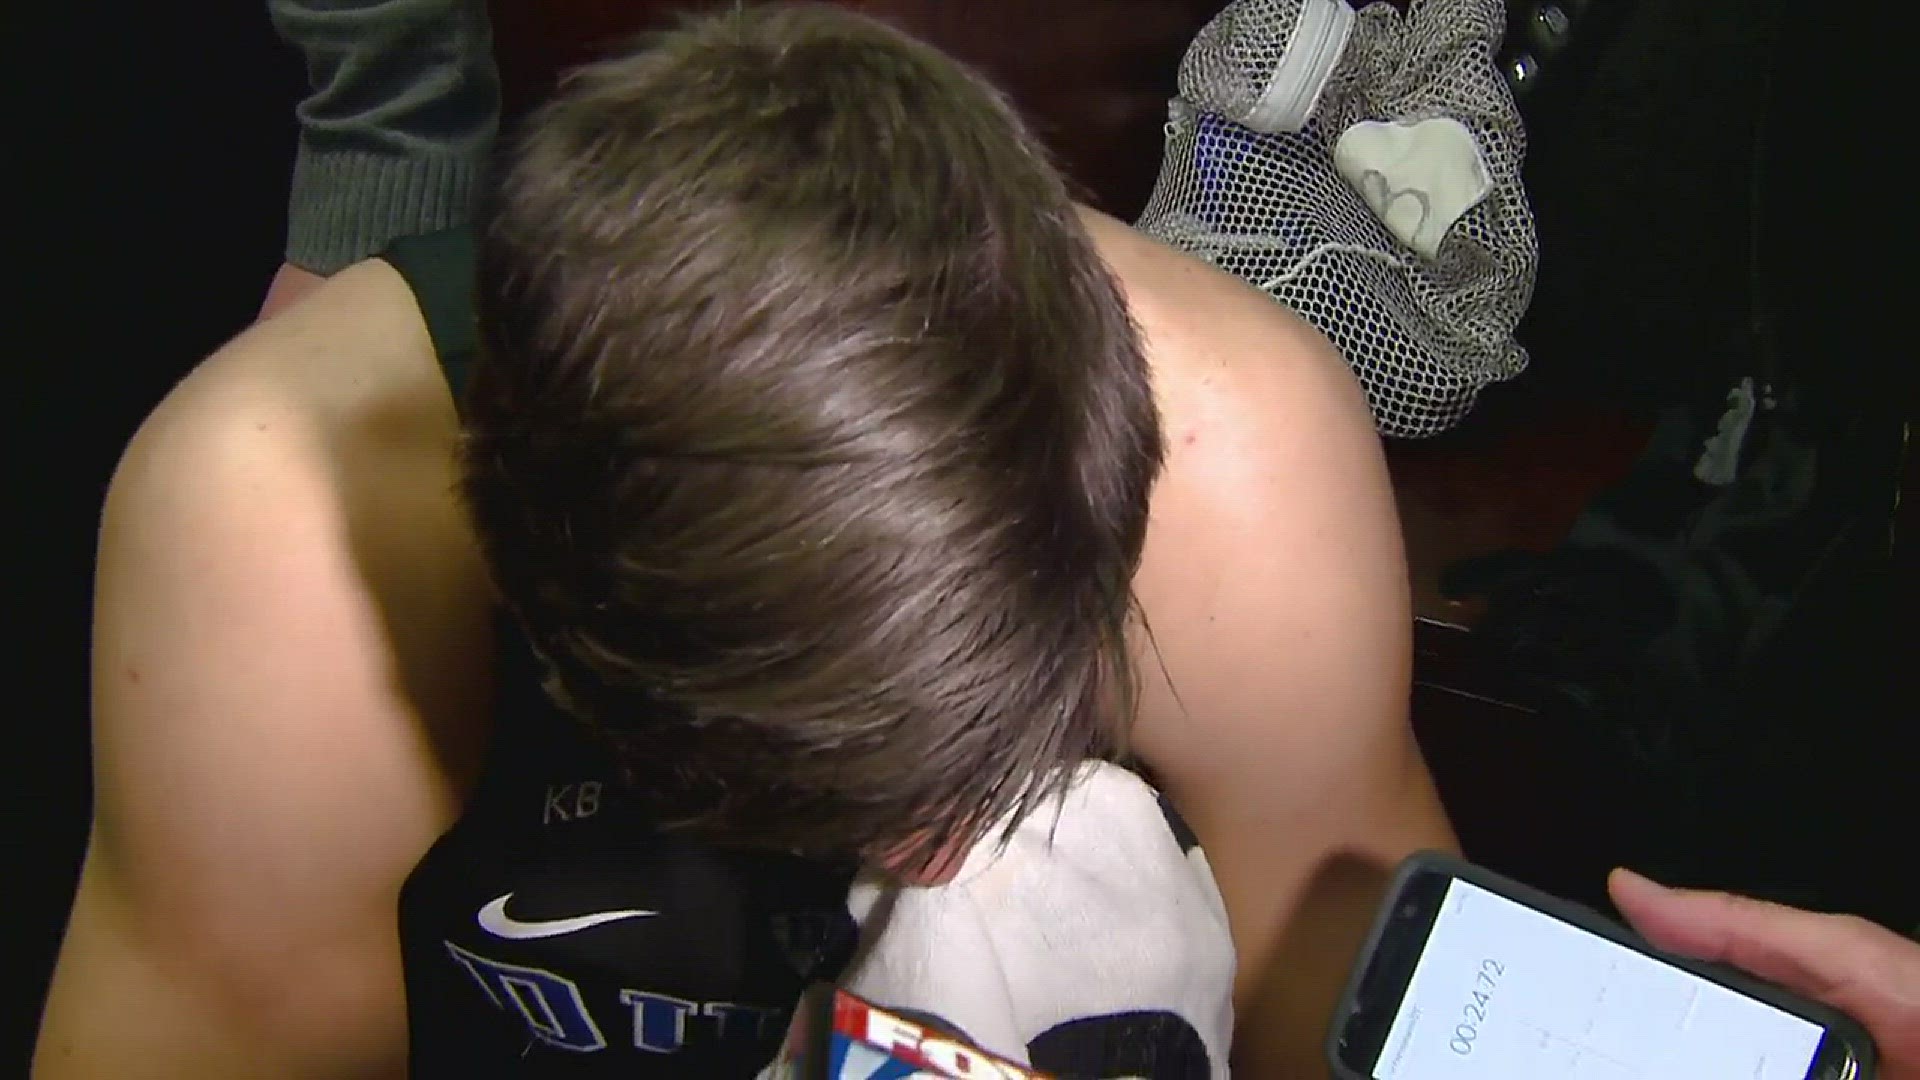 Postgame Interview with Duke's Grayson Allen who tears up during his apology for tripping an Elon University player. Allen drew a technical foul after the incident.